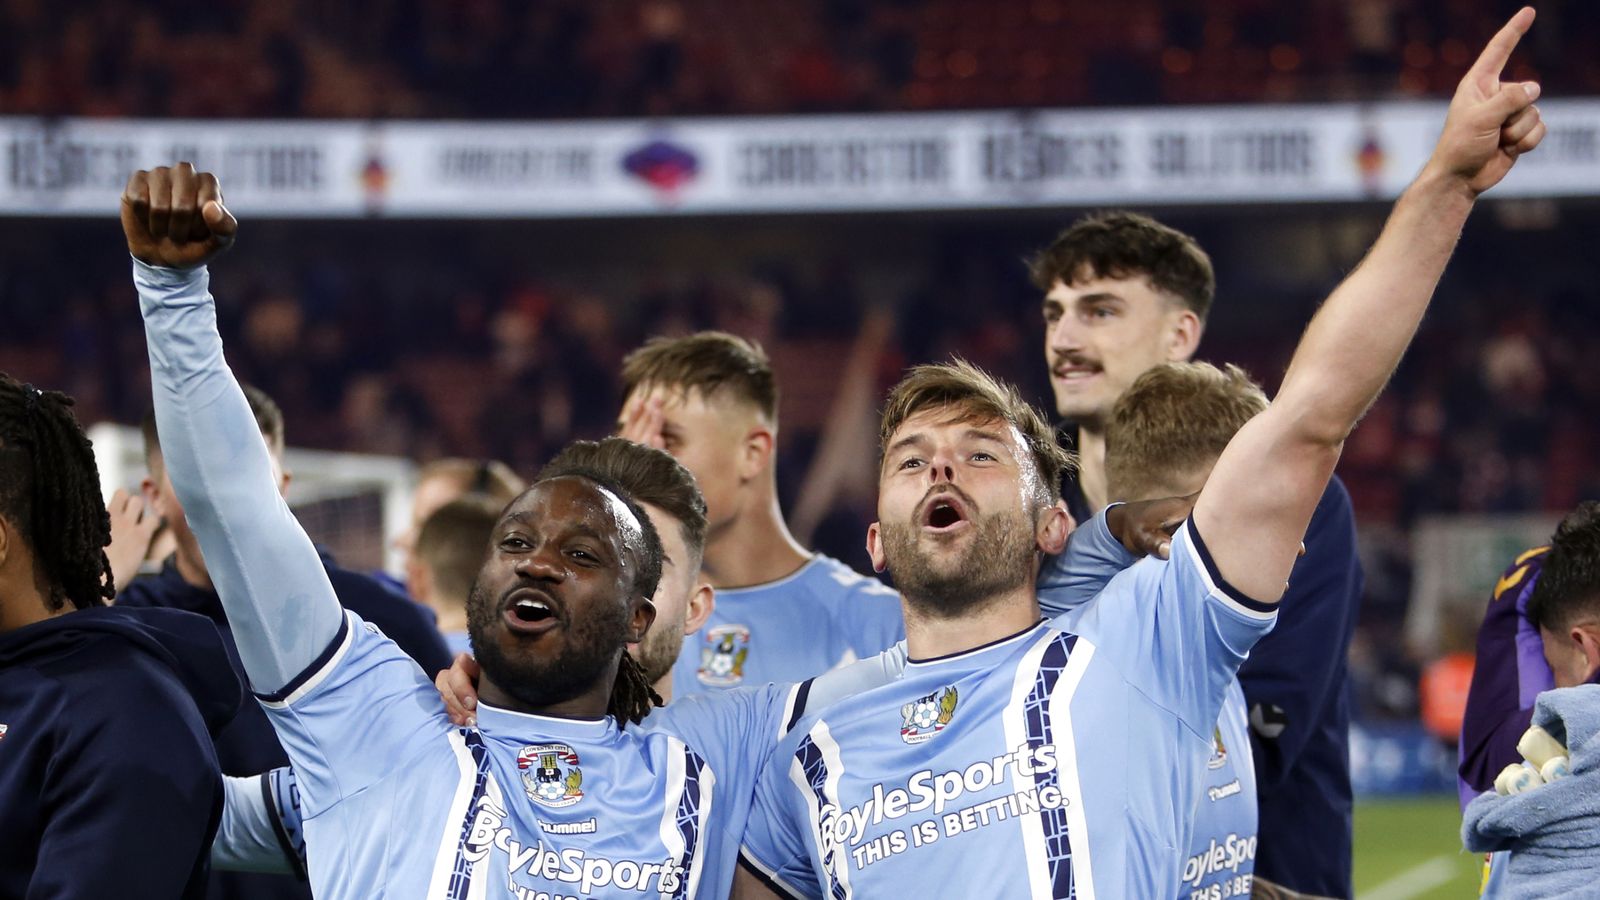 Coventry Building Society - This evening Coventry City FC welcome Millwall  Football Club to the Coventry Building Society Arena for what is expected  to be an exciting game in the championship. We